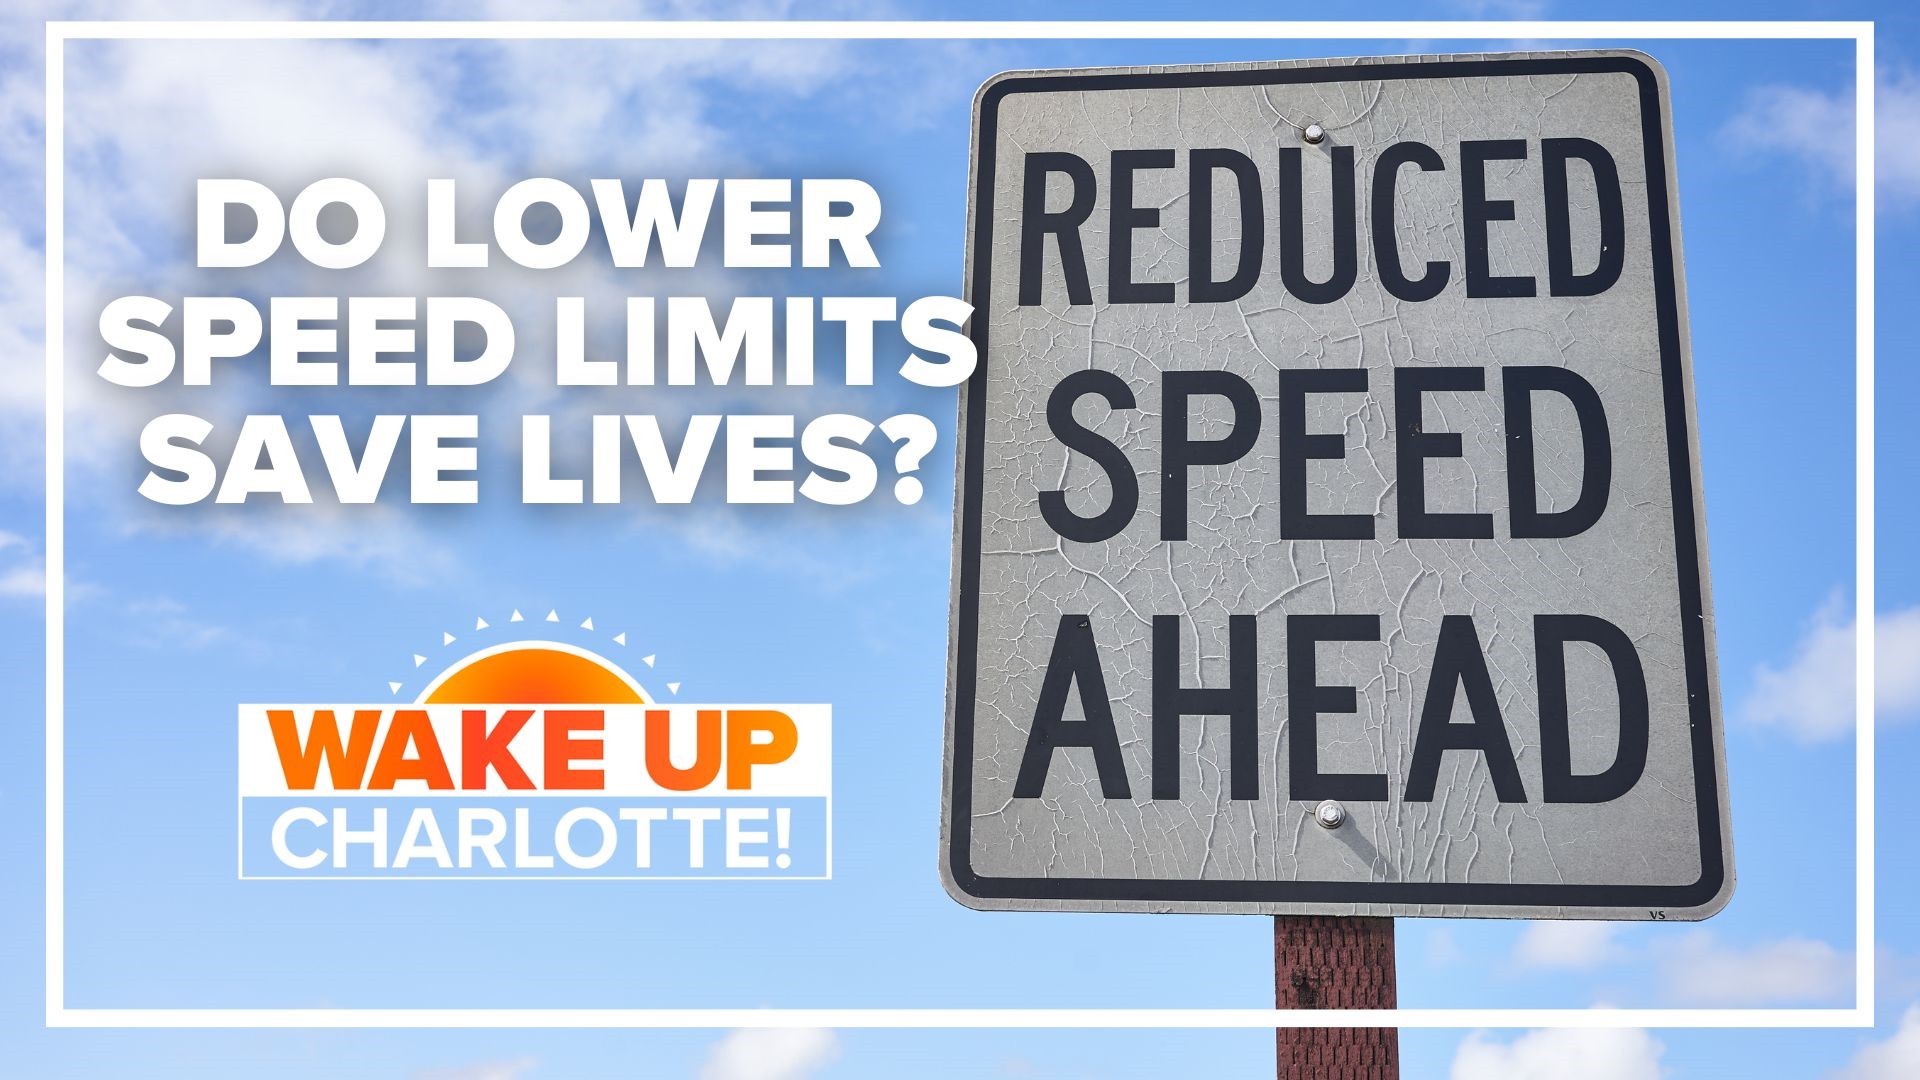 Over the past few years, Charlotte and other cities have rolled out plans to reduce traffic deaths. However, slower speed limits haven't been an effective solution.